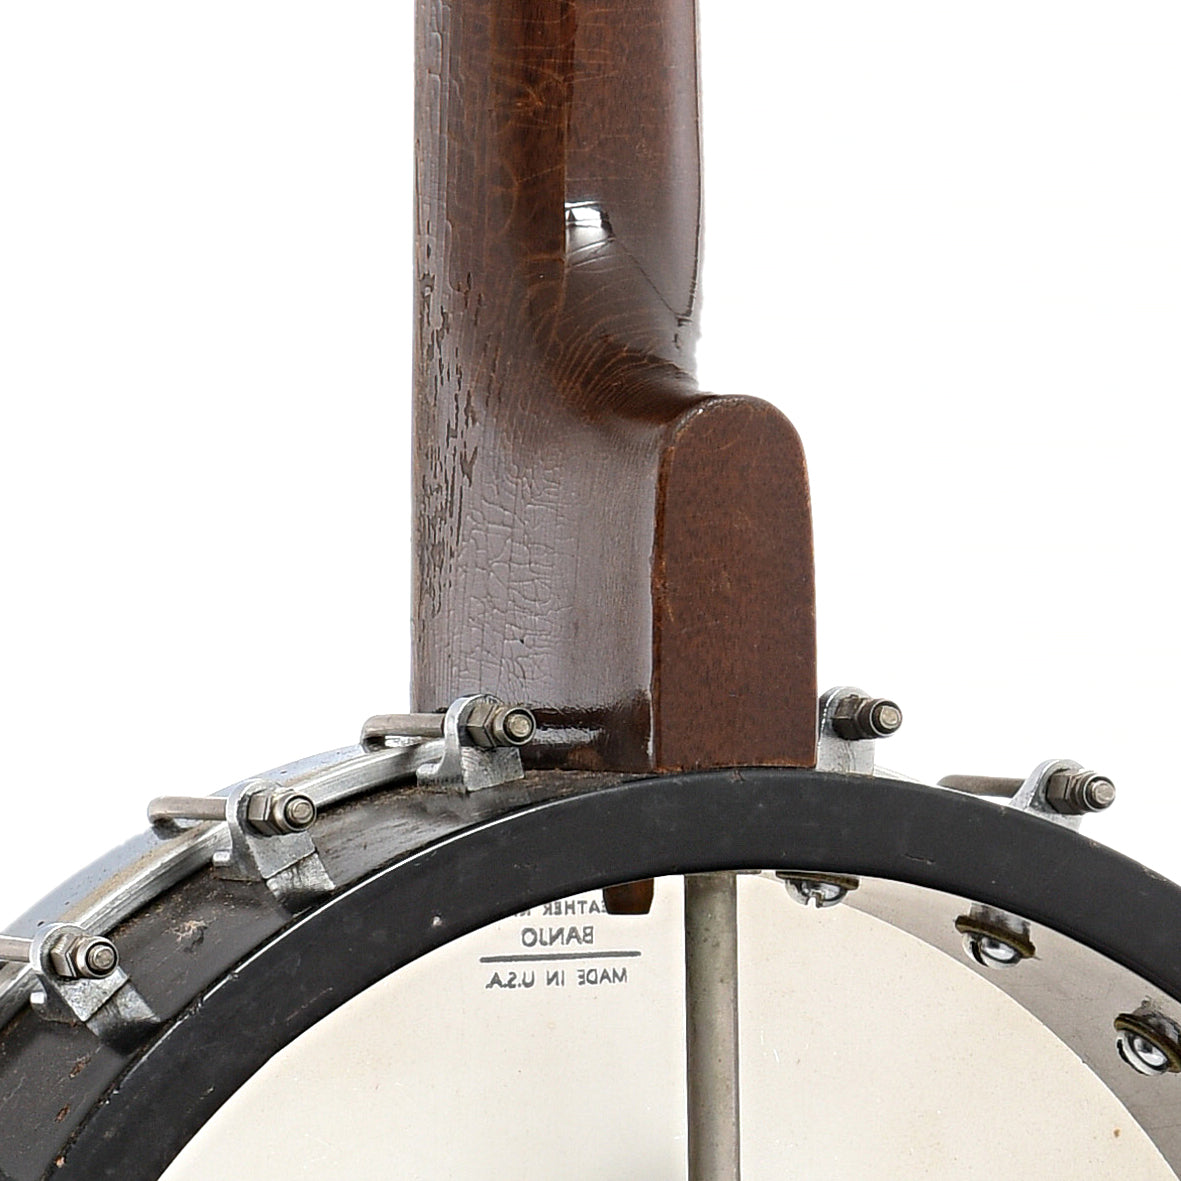 Neck joint of Gibson RB-175 Extra Long Neck Banjo (1966)